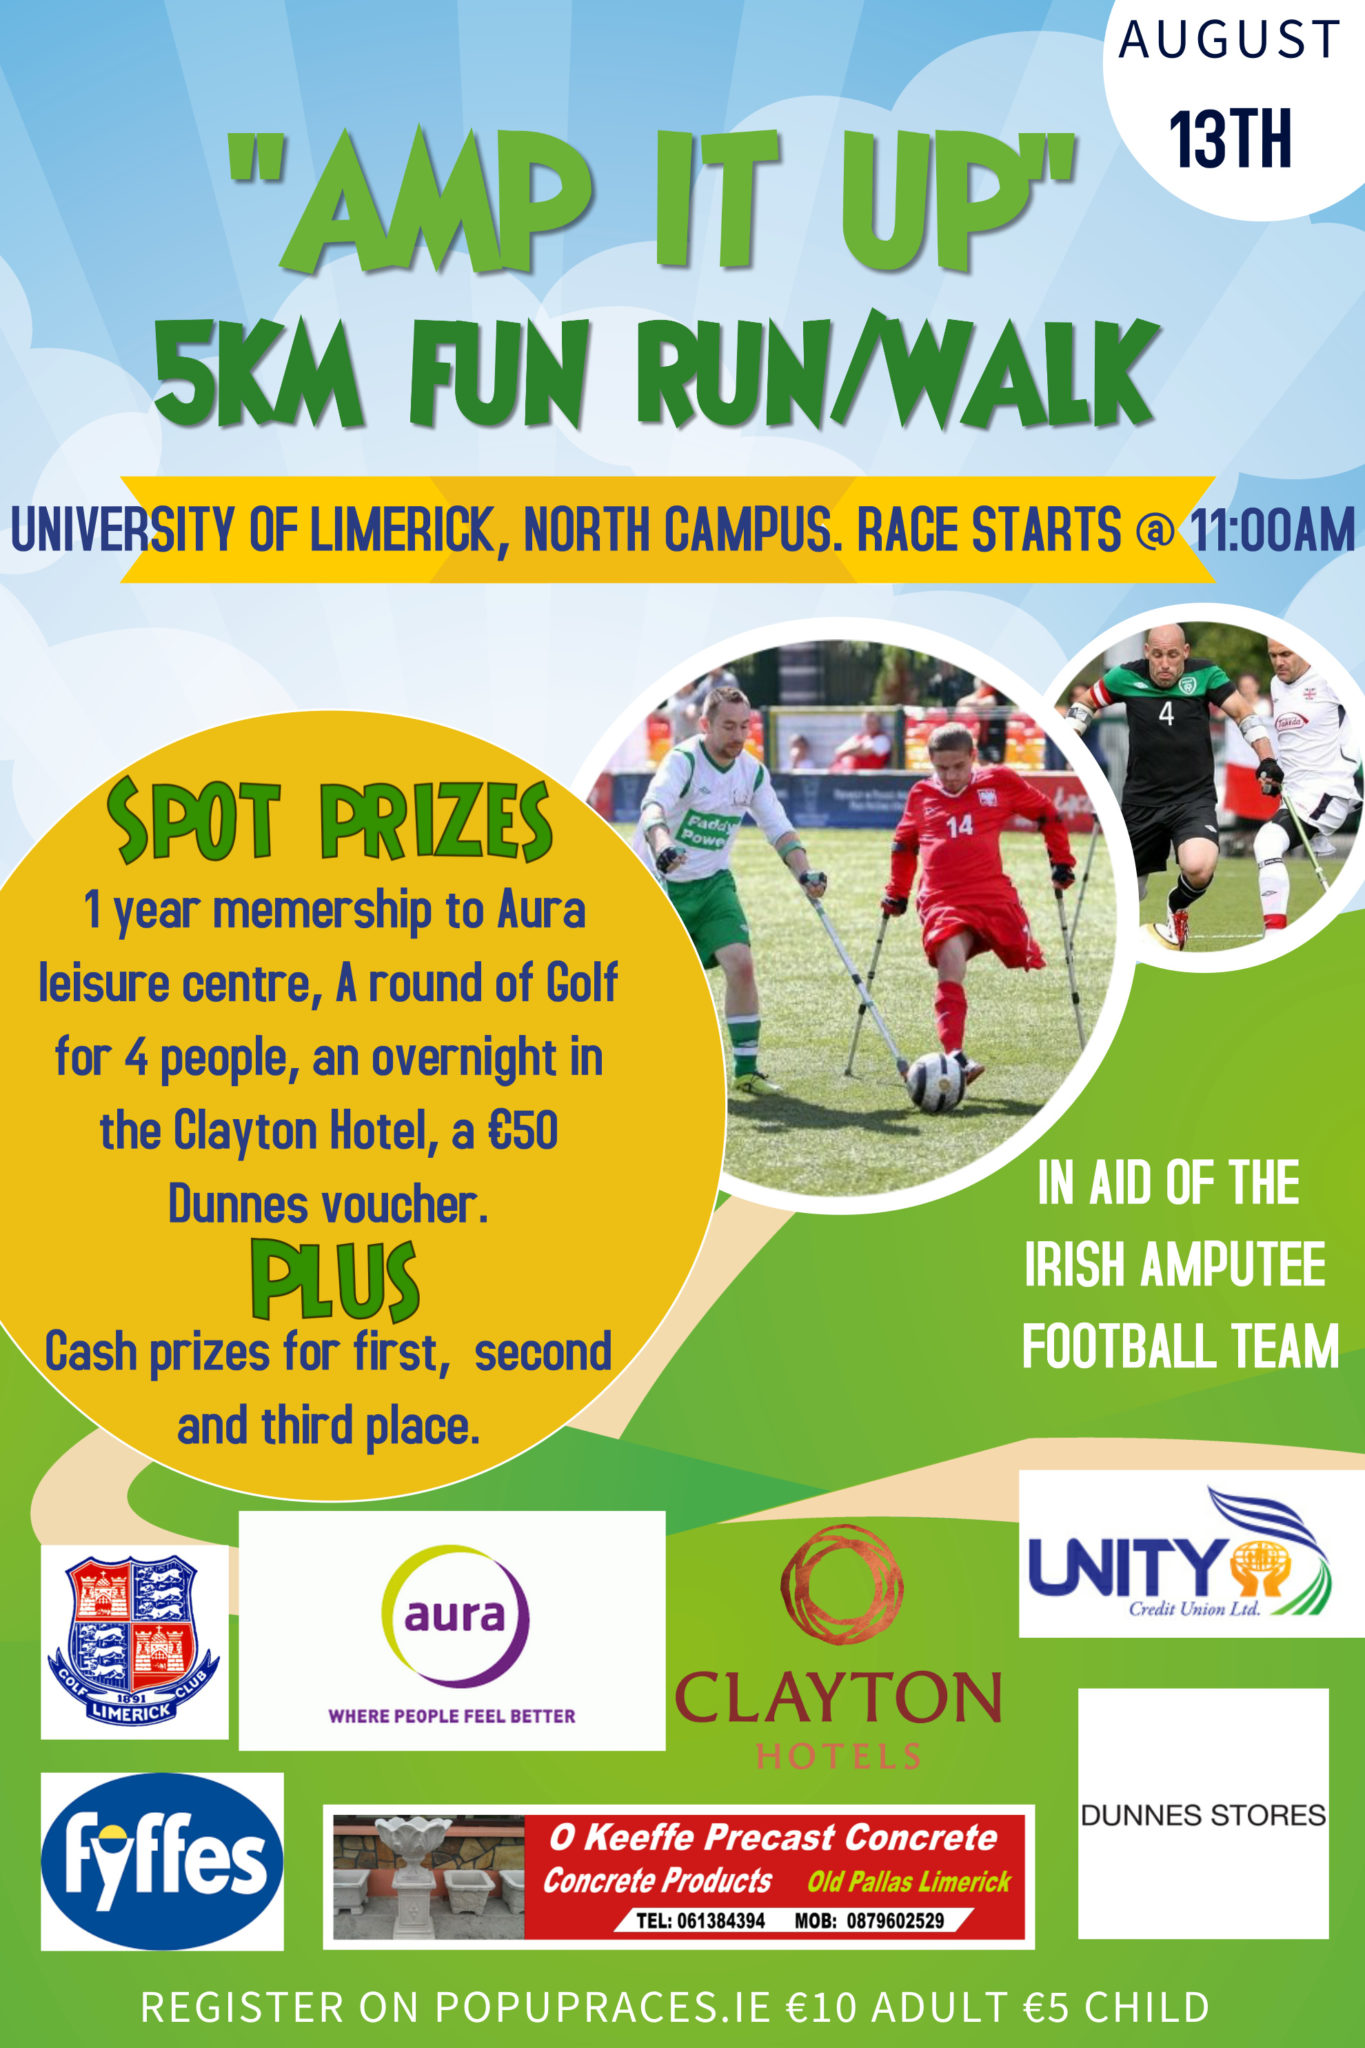 AMP IT UP 23K FUN RUN/WALK LIMERICK - Pop Up Races Intended For 5K Flyer Template